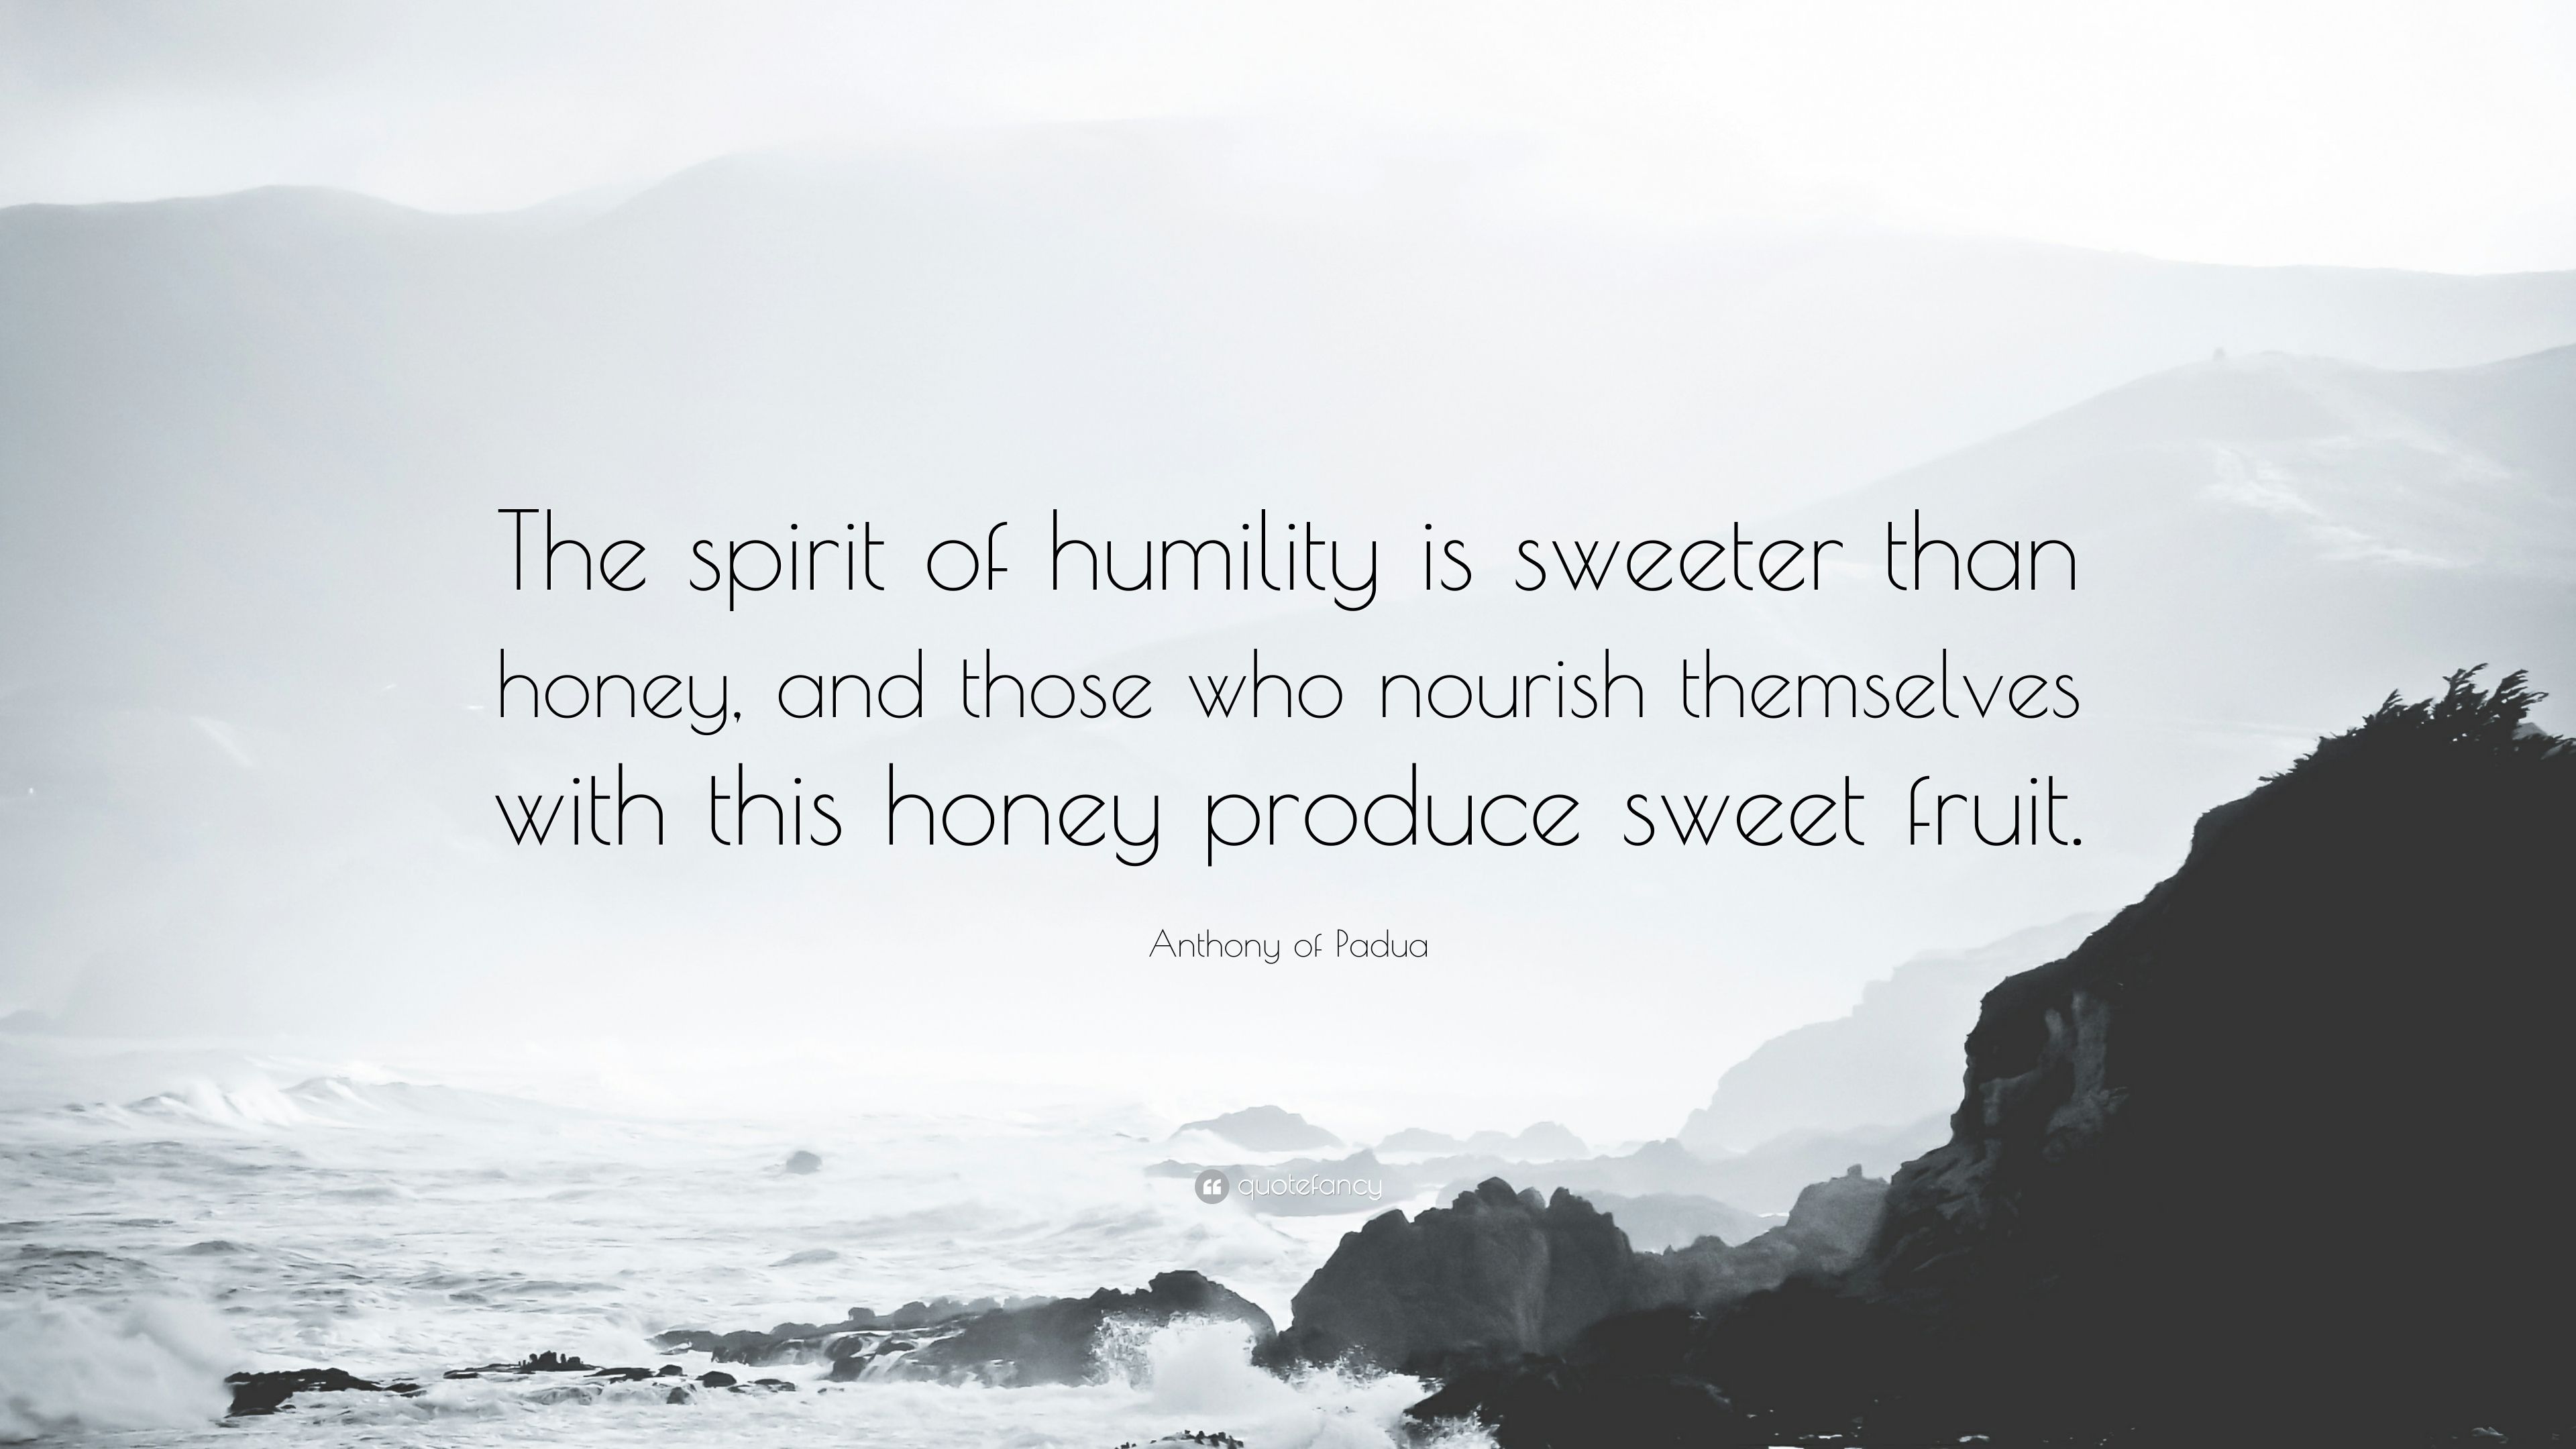 Anthony of Padua Quote: “The spirit of humility is sweeter than